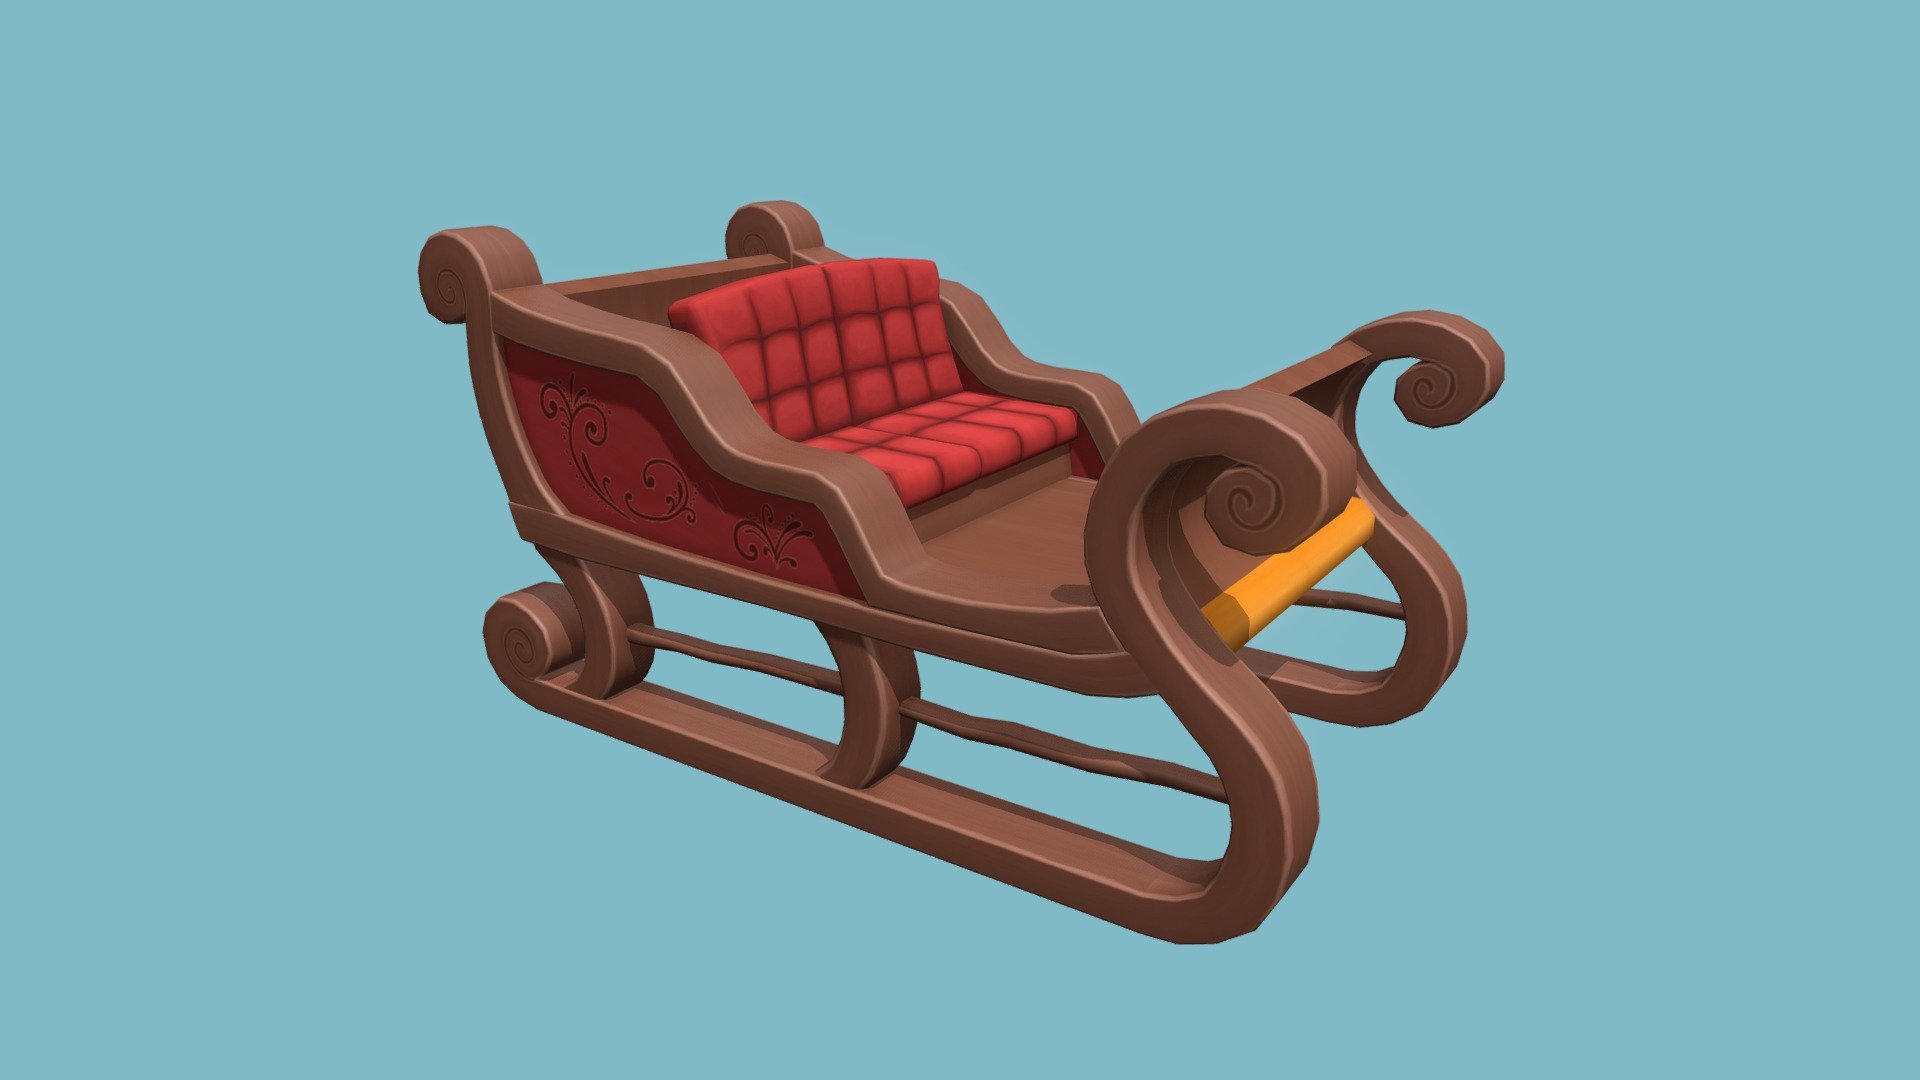 This is a sleigh I created for a small winter holiday scene 3d model